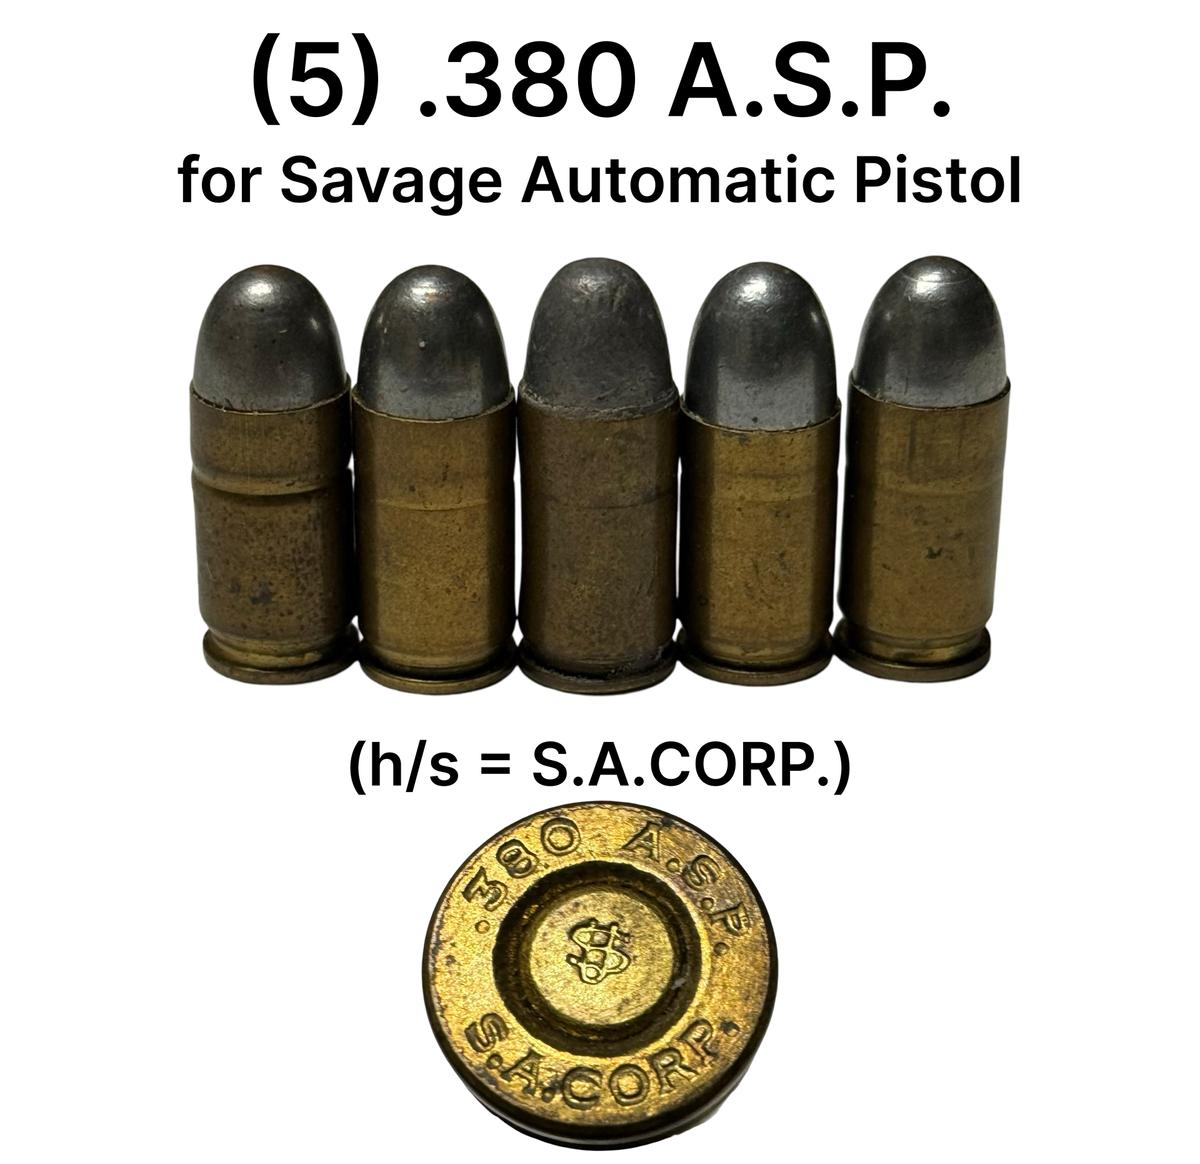 5rds. of .380 A.S.P. Ammunition for Savage Automatic Pistol